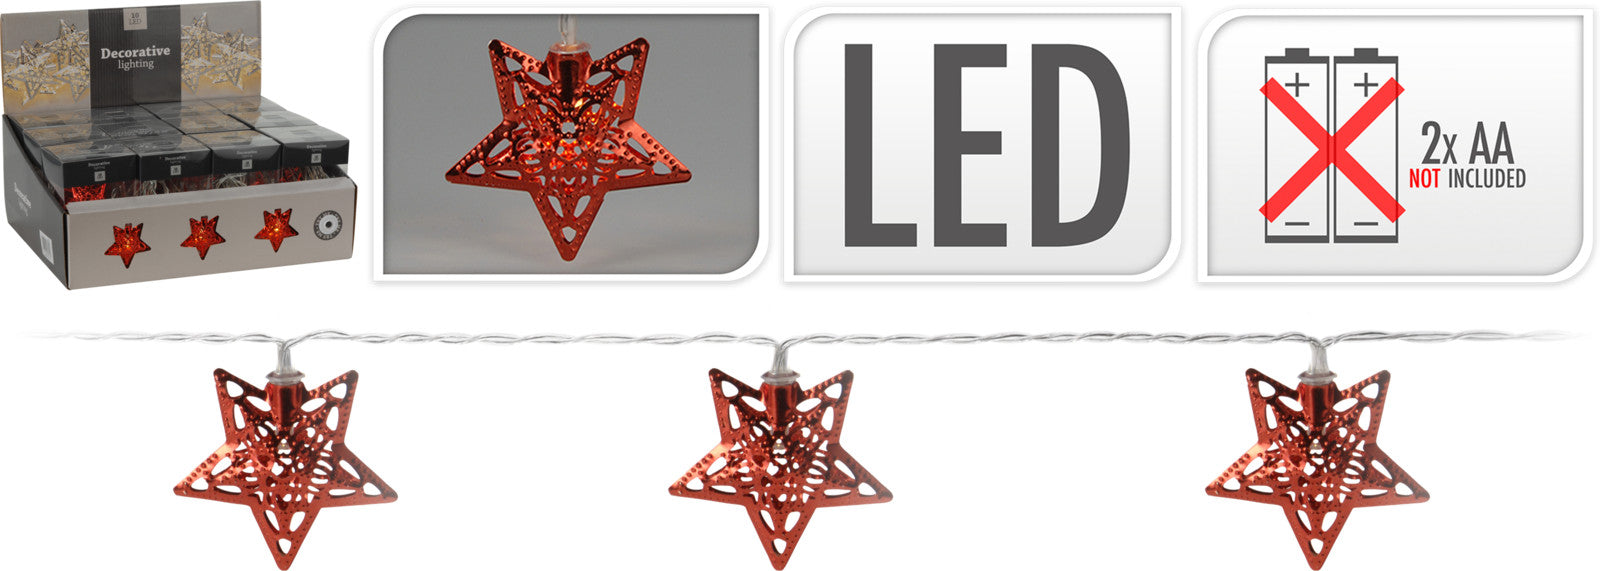 Red star lighting with 10 stars